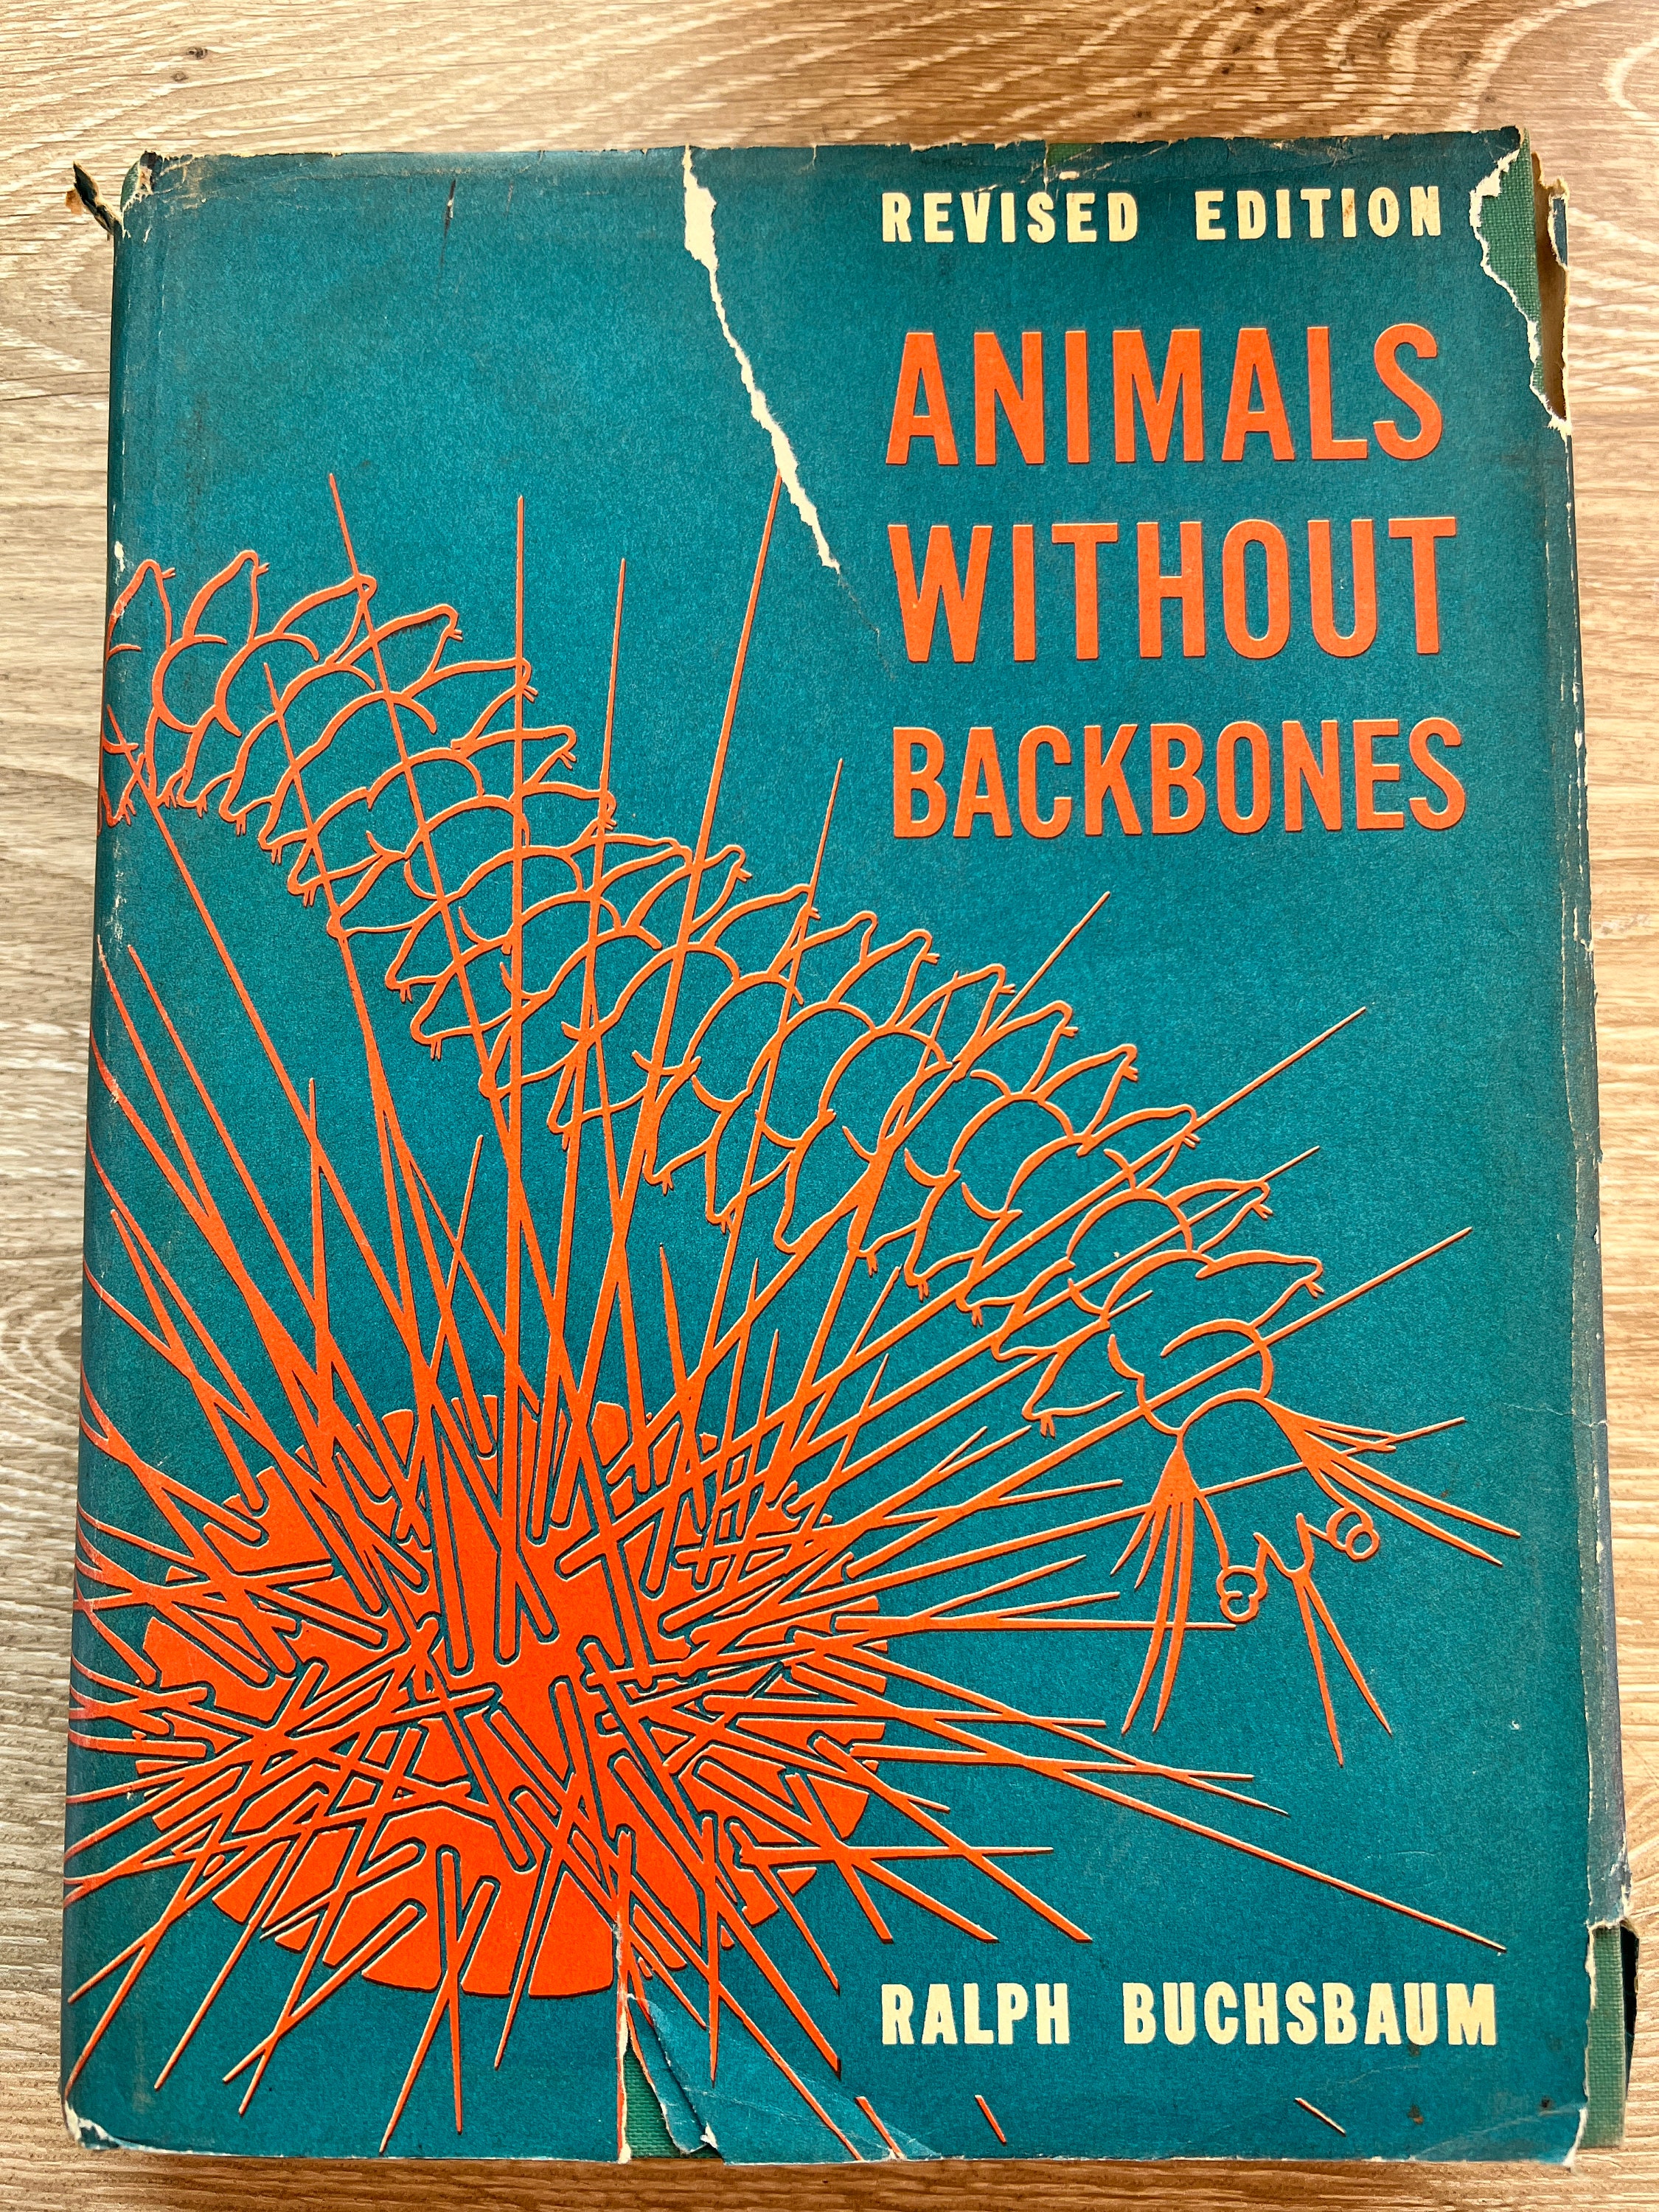 Animals Without Backbones: an Introduction to the - Etsy